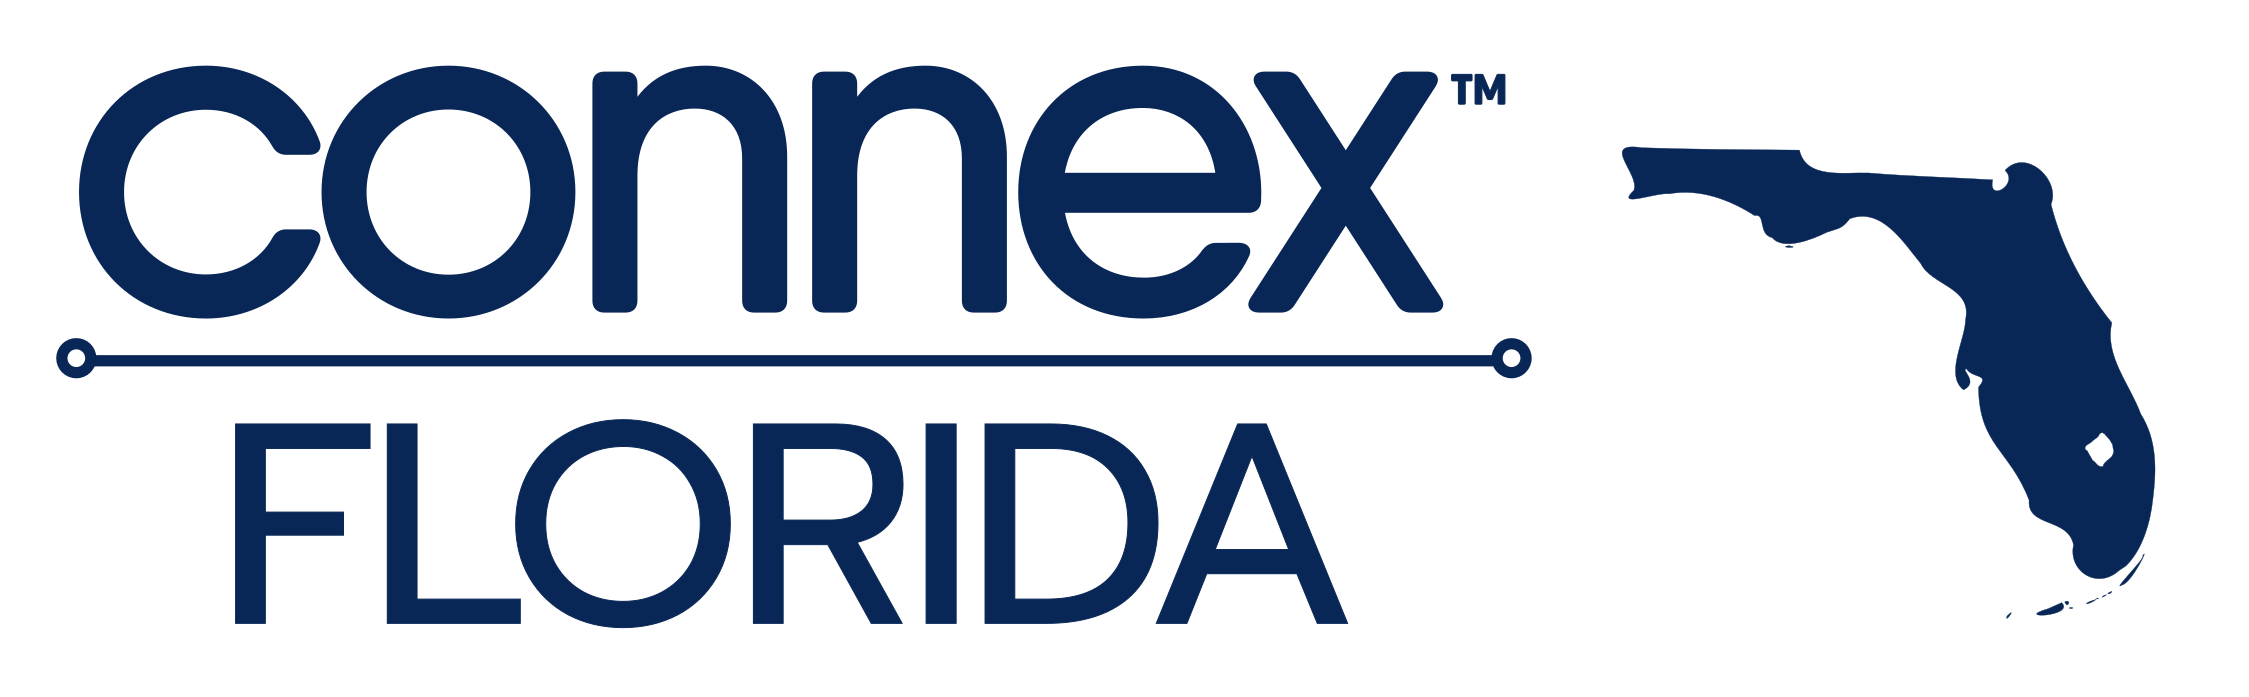 connex-florida-manufacturing-supply-chain-solution